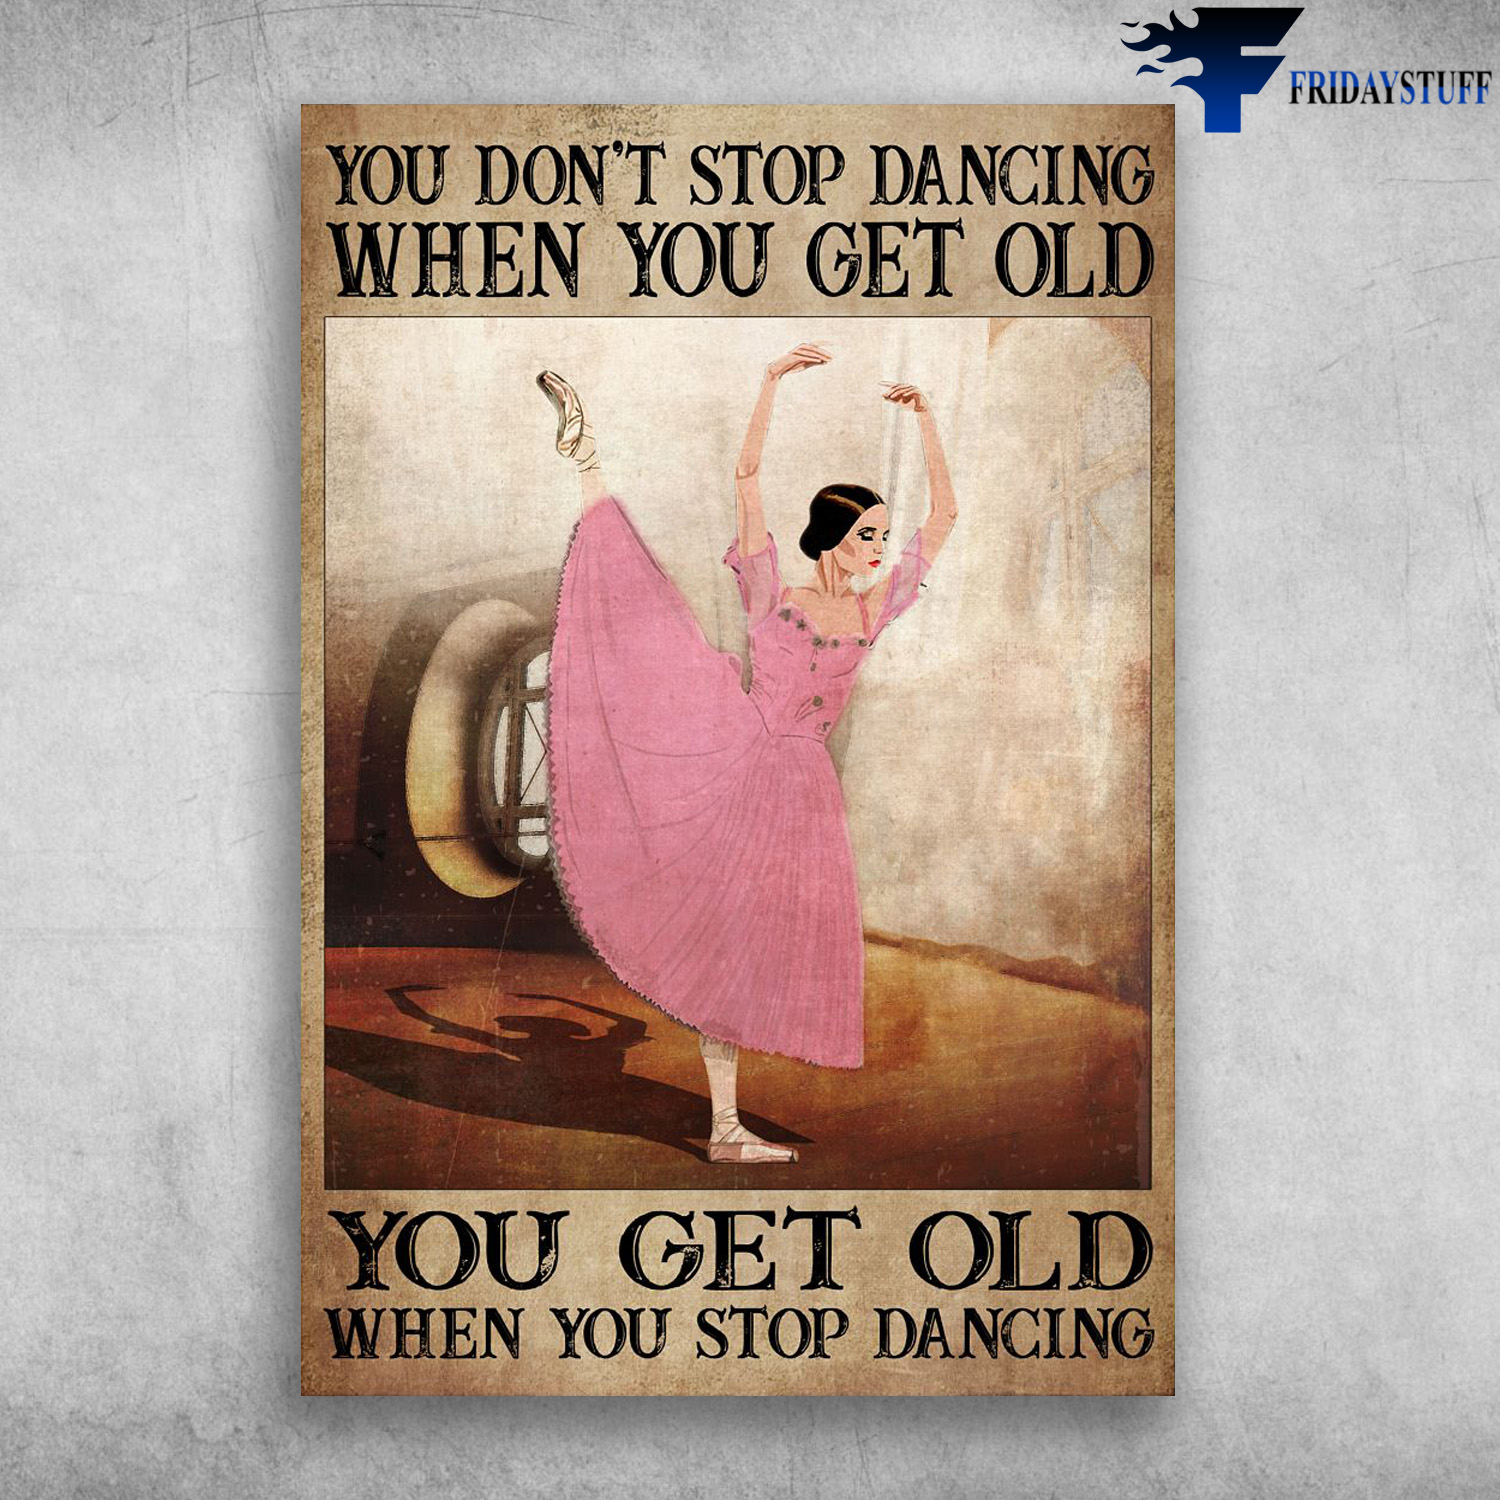 Old Lady Ballet - You Don't Stop Dancing When You Get Old, You Get Old When You Stop Dancing